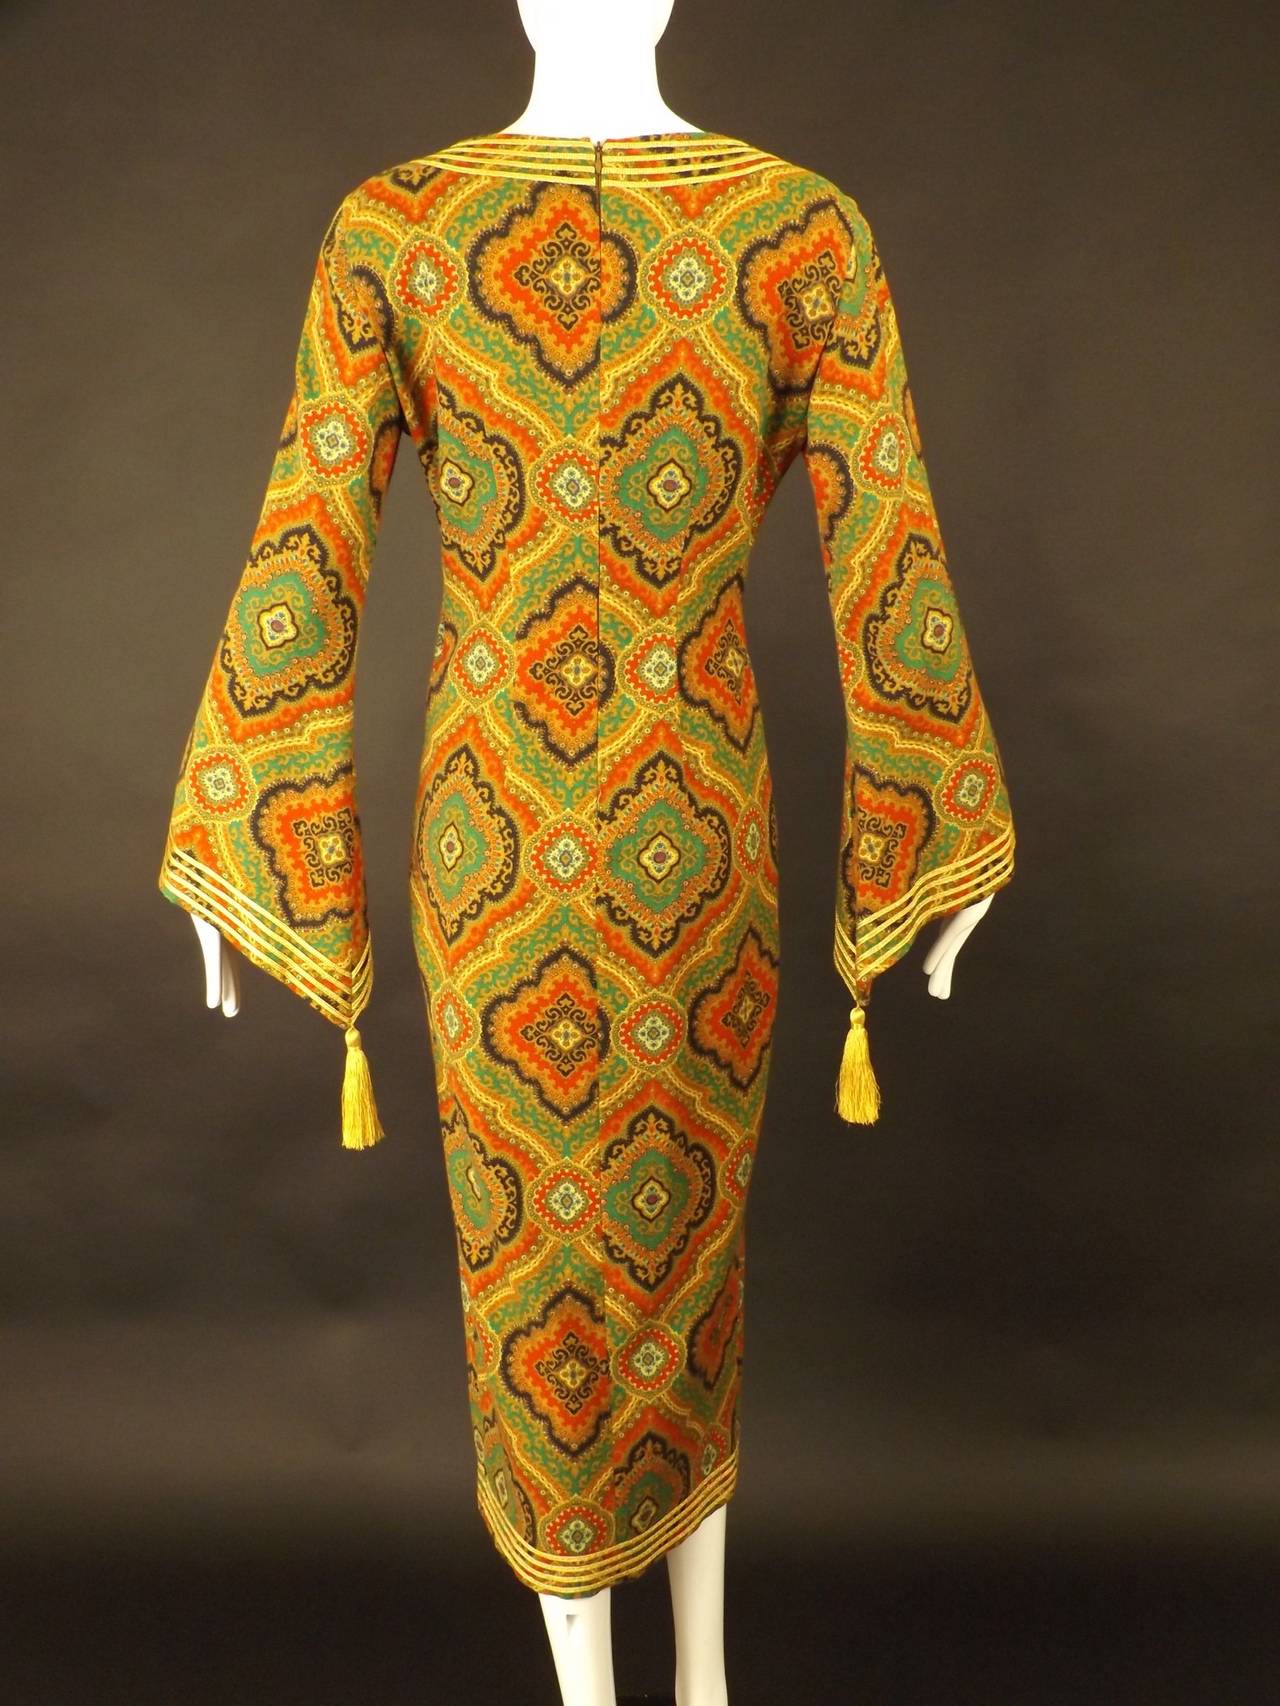 Women's 1990s Moschino Couture Patterned Wool Dress